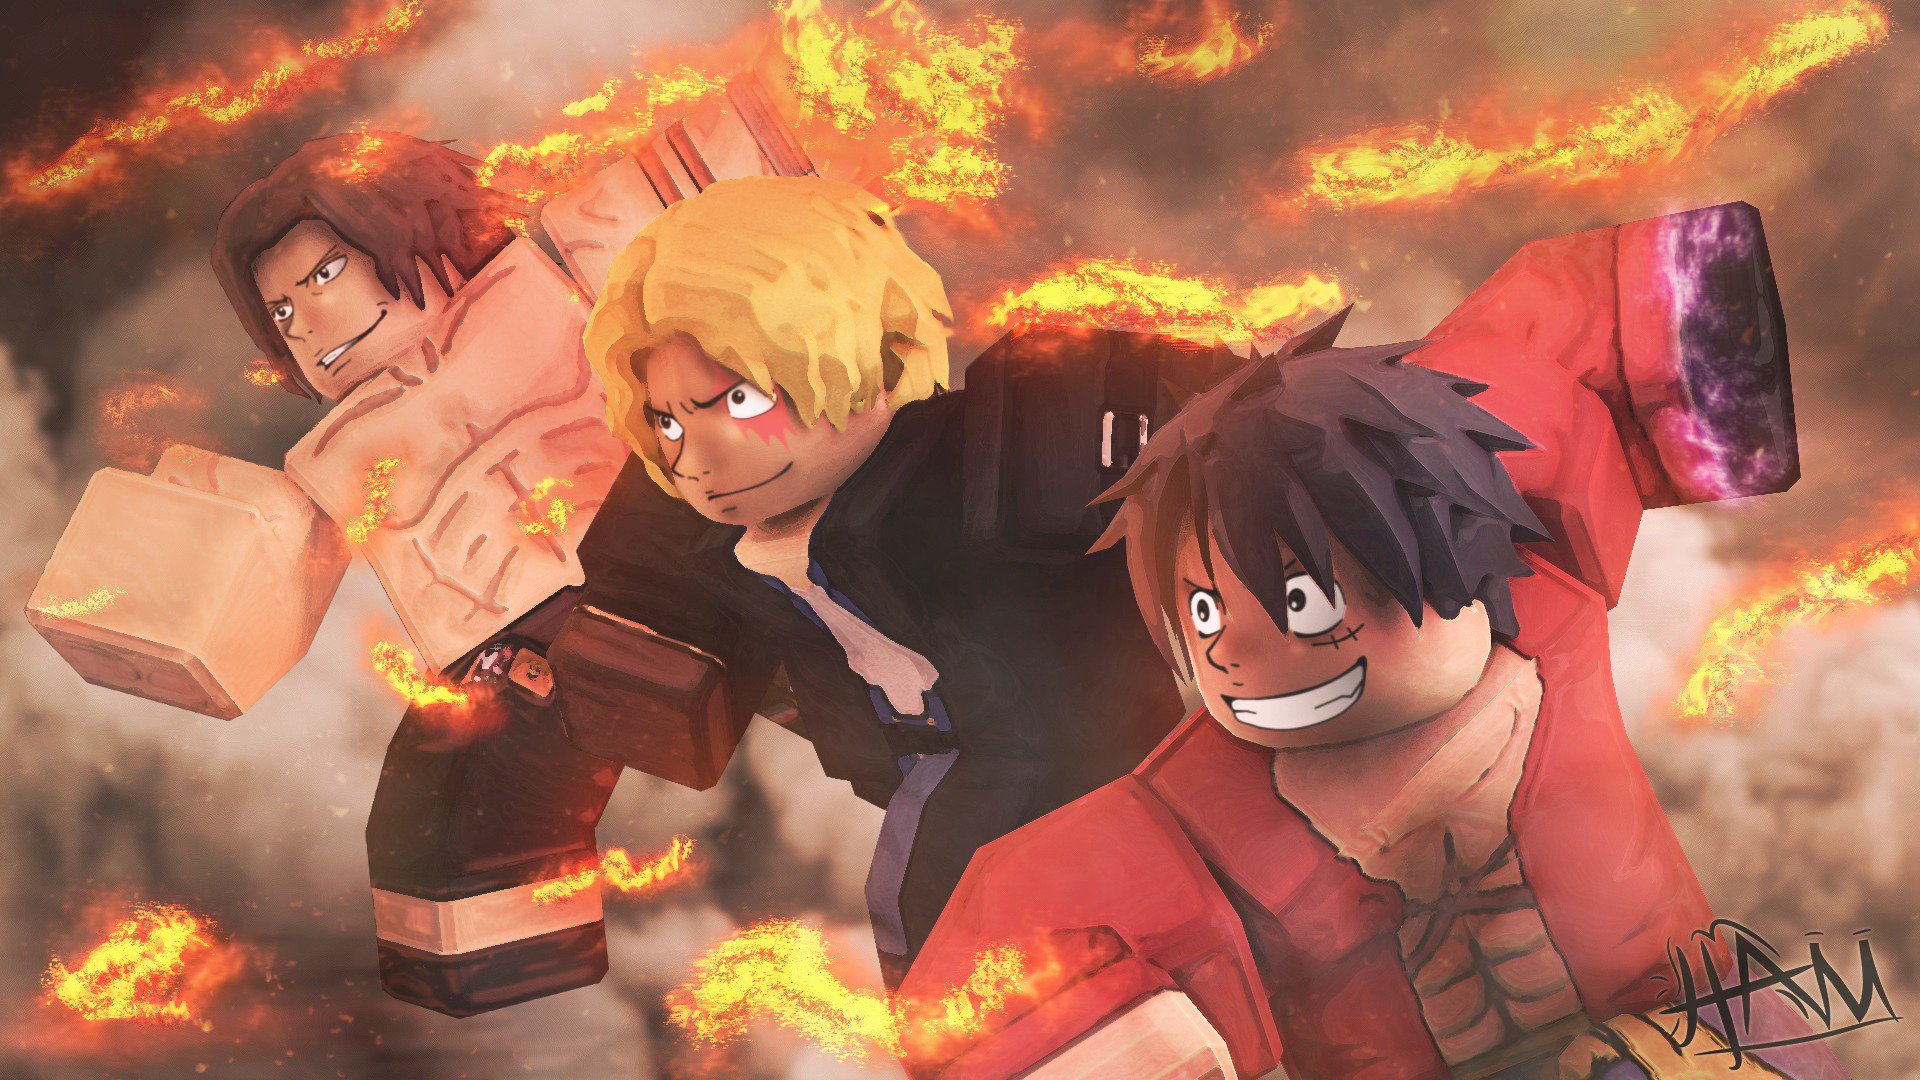 Ham On Twitter Luffy Sabo N Ace Best Trio In One Piece Dont Me This Took A While Roblox Robloxart Robloxgfx Robloxdev - je tt on twitter one piece gfx magellan vs luffy already sold robloxdev roblox robloxart robloxgfx rbxdev